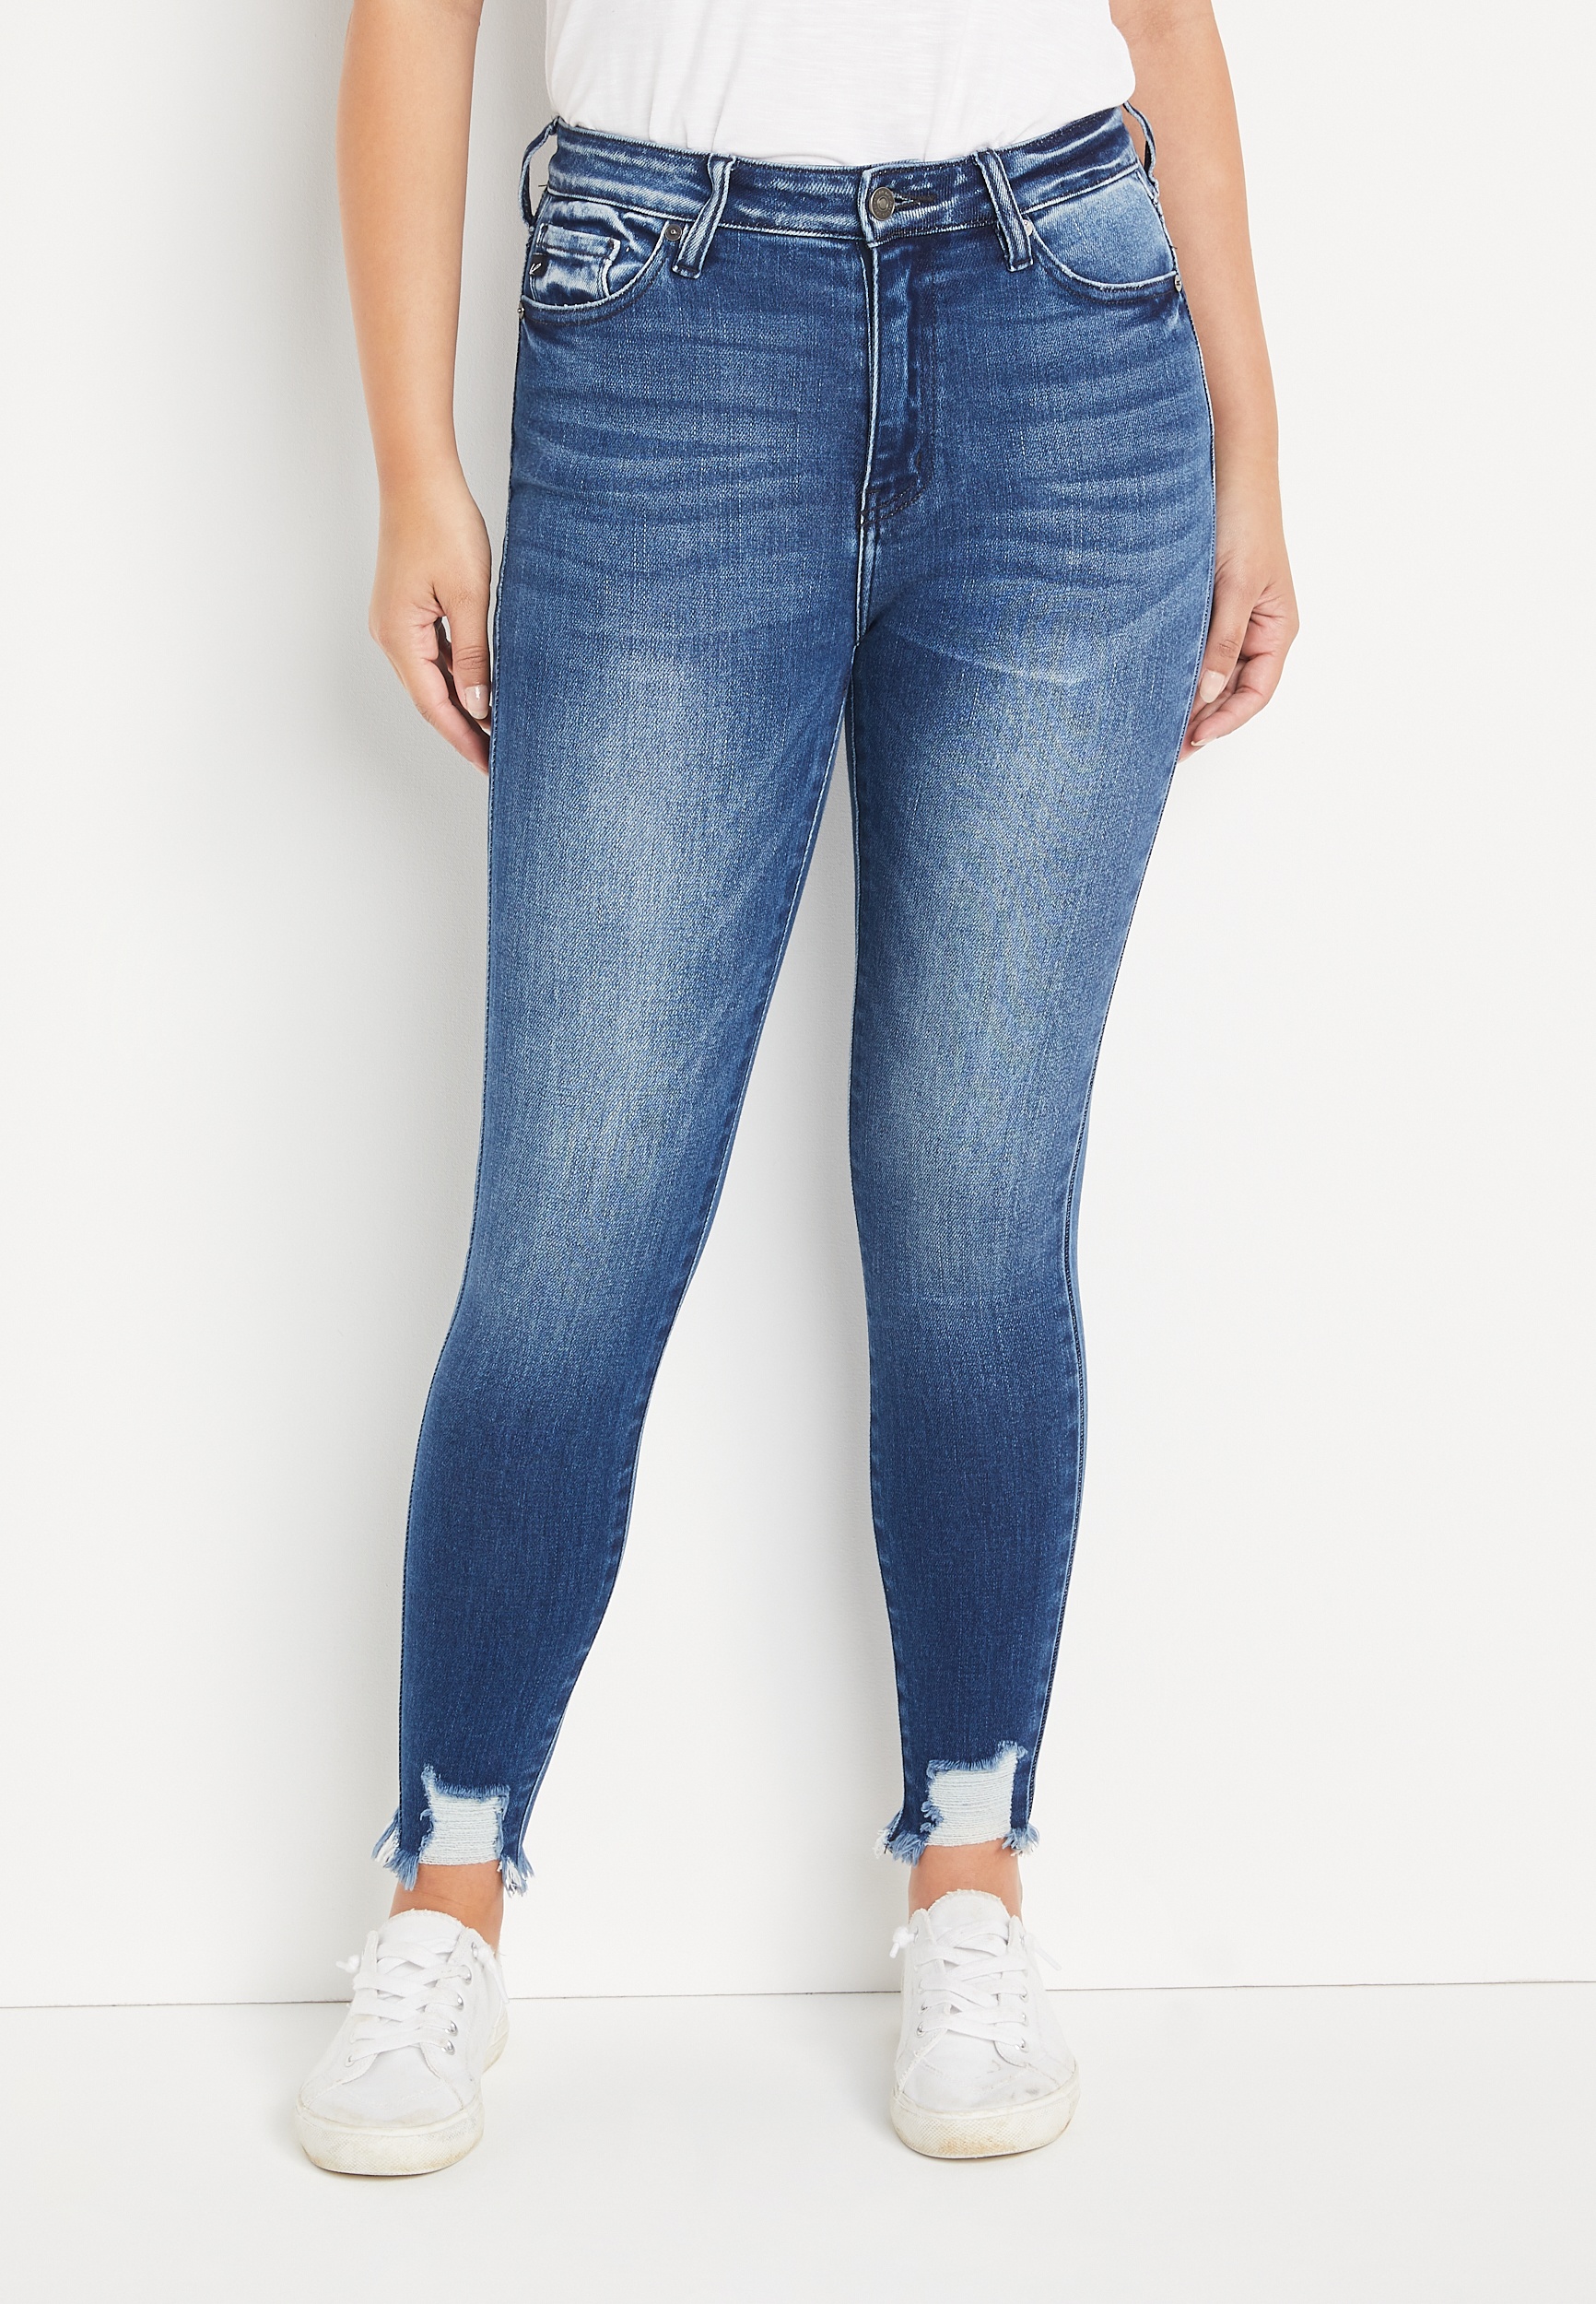 ripped blue jeans for women